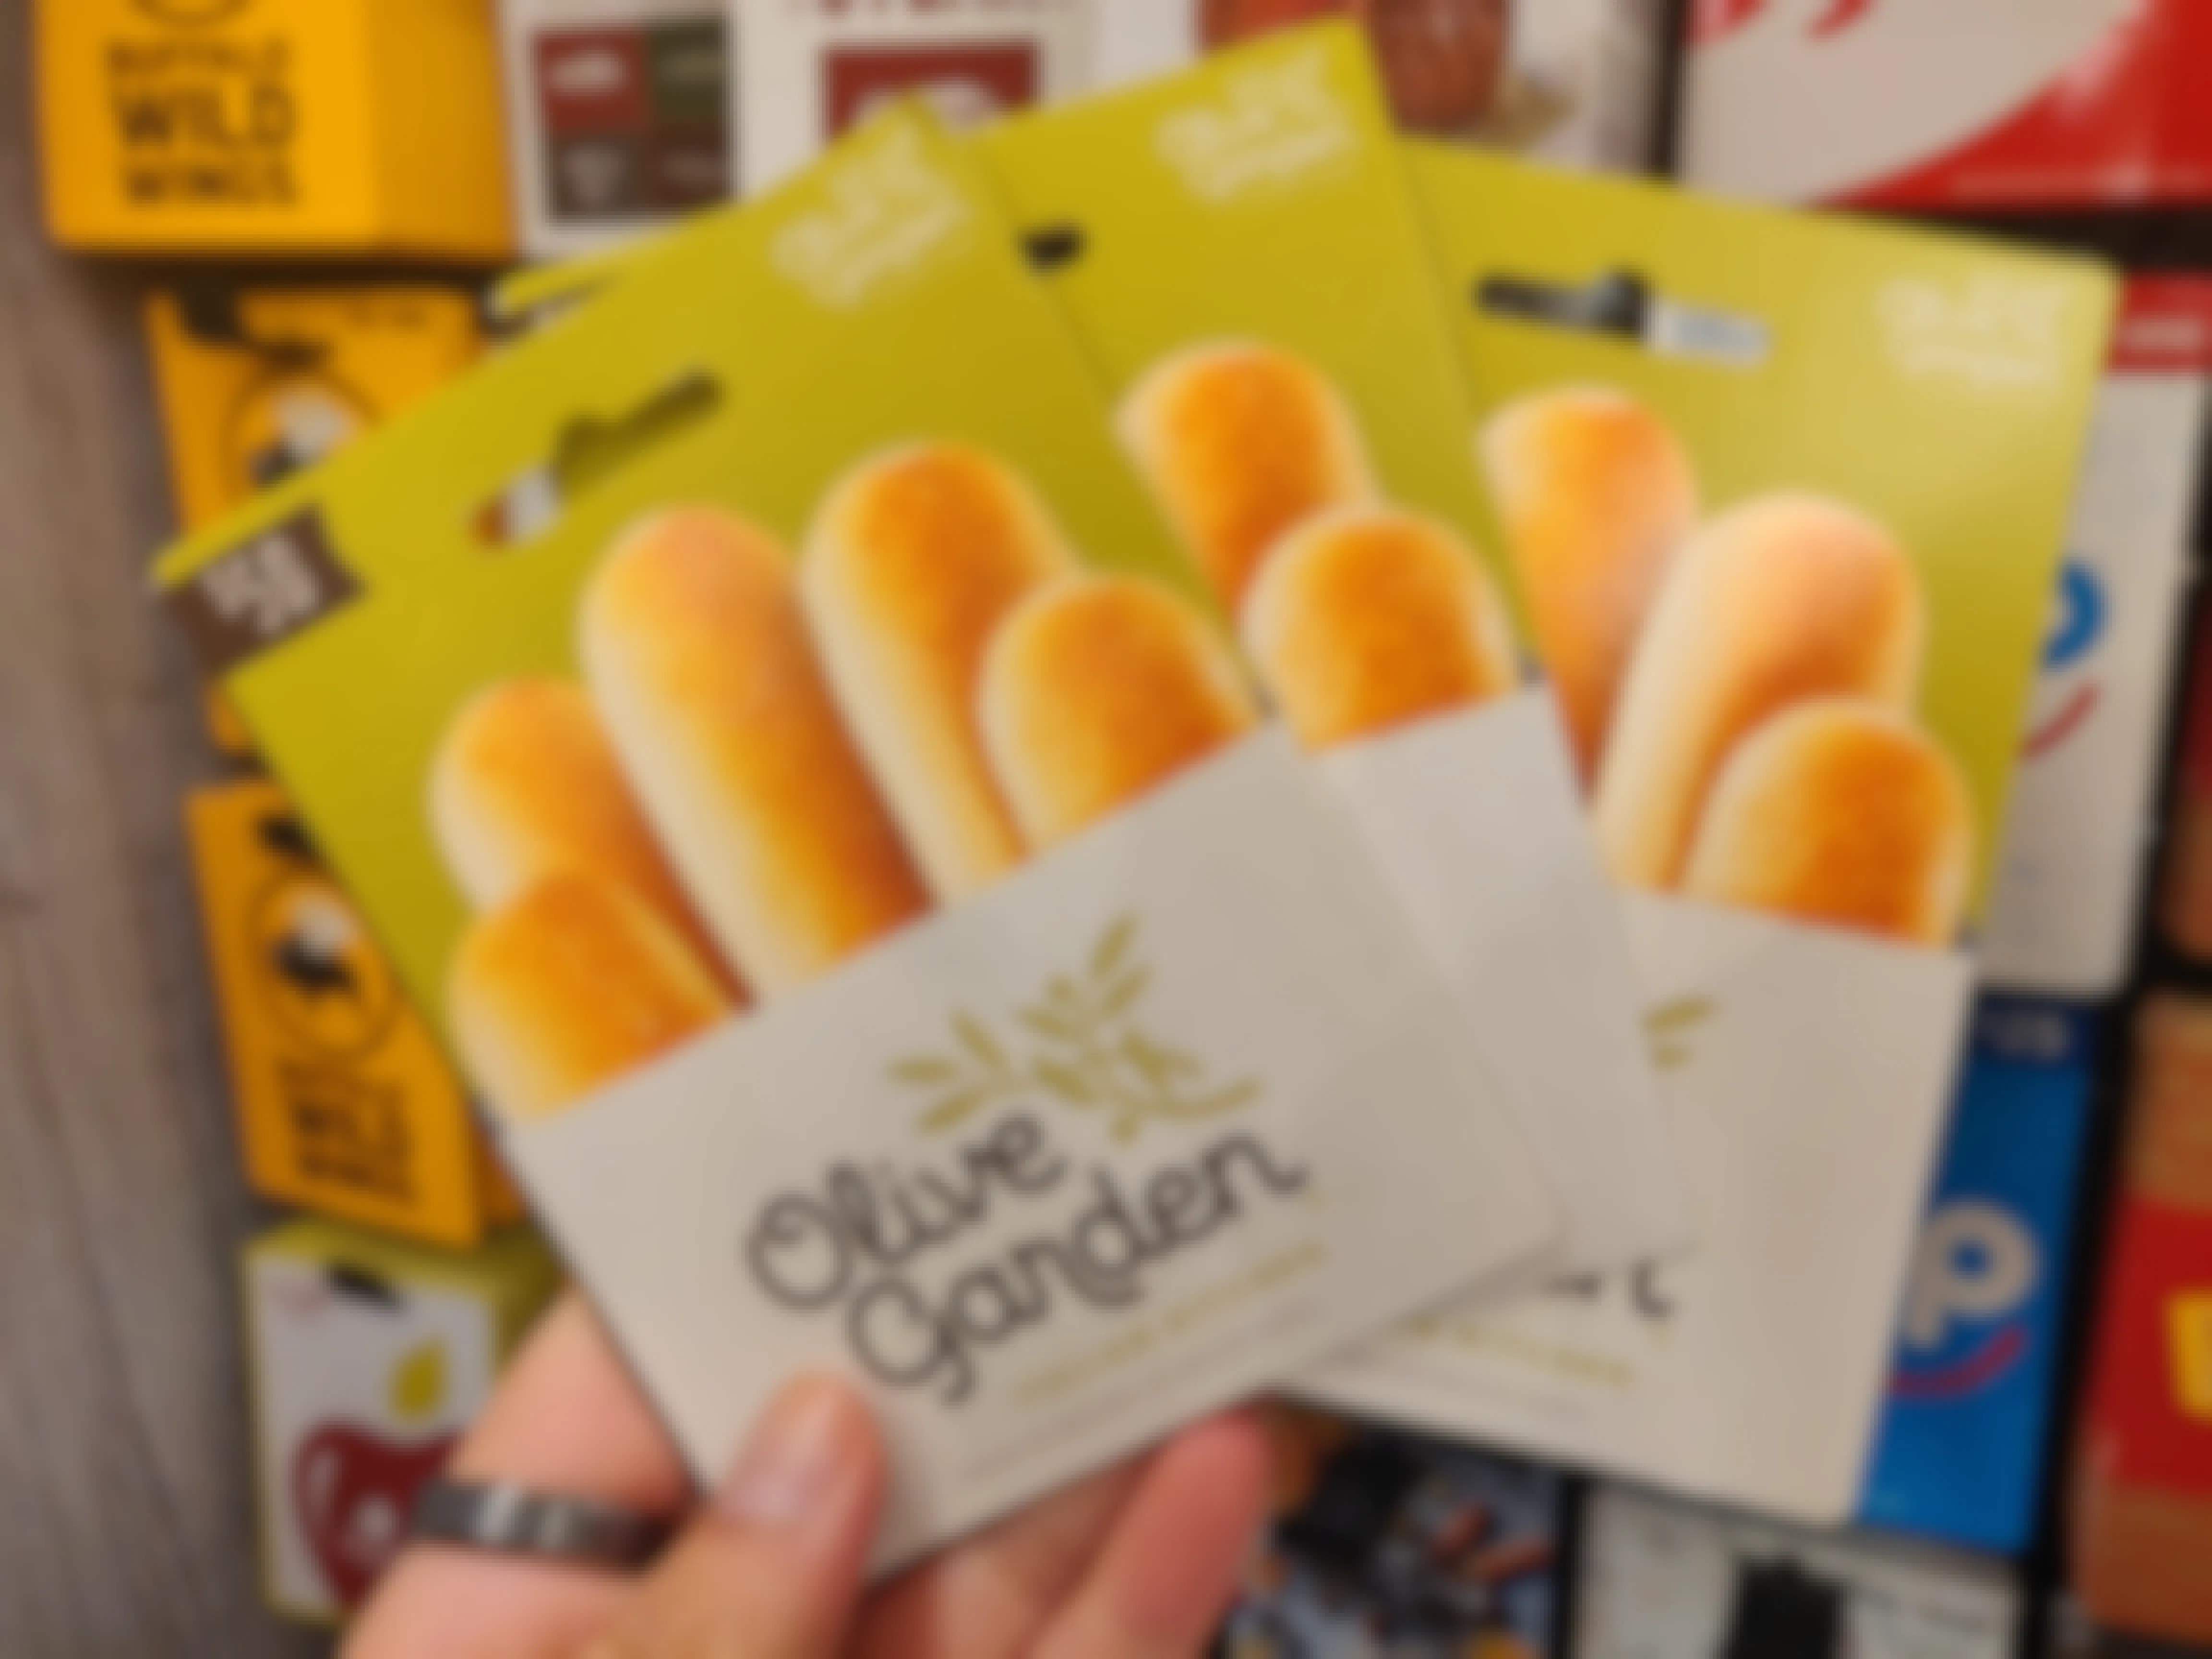 olive garden gift cards set on.a background of gift cards